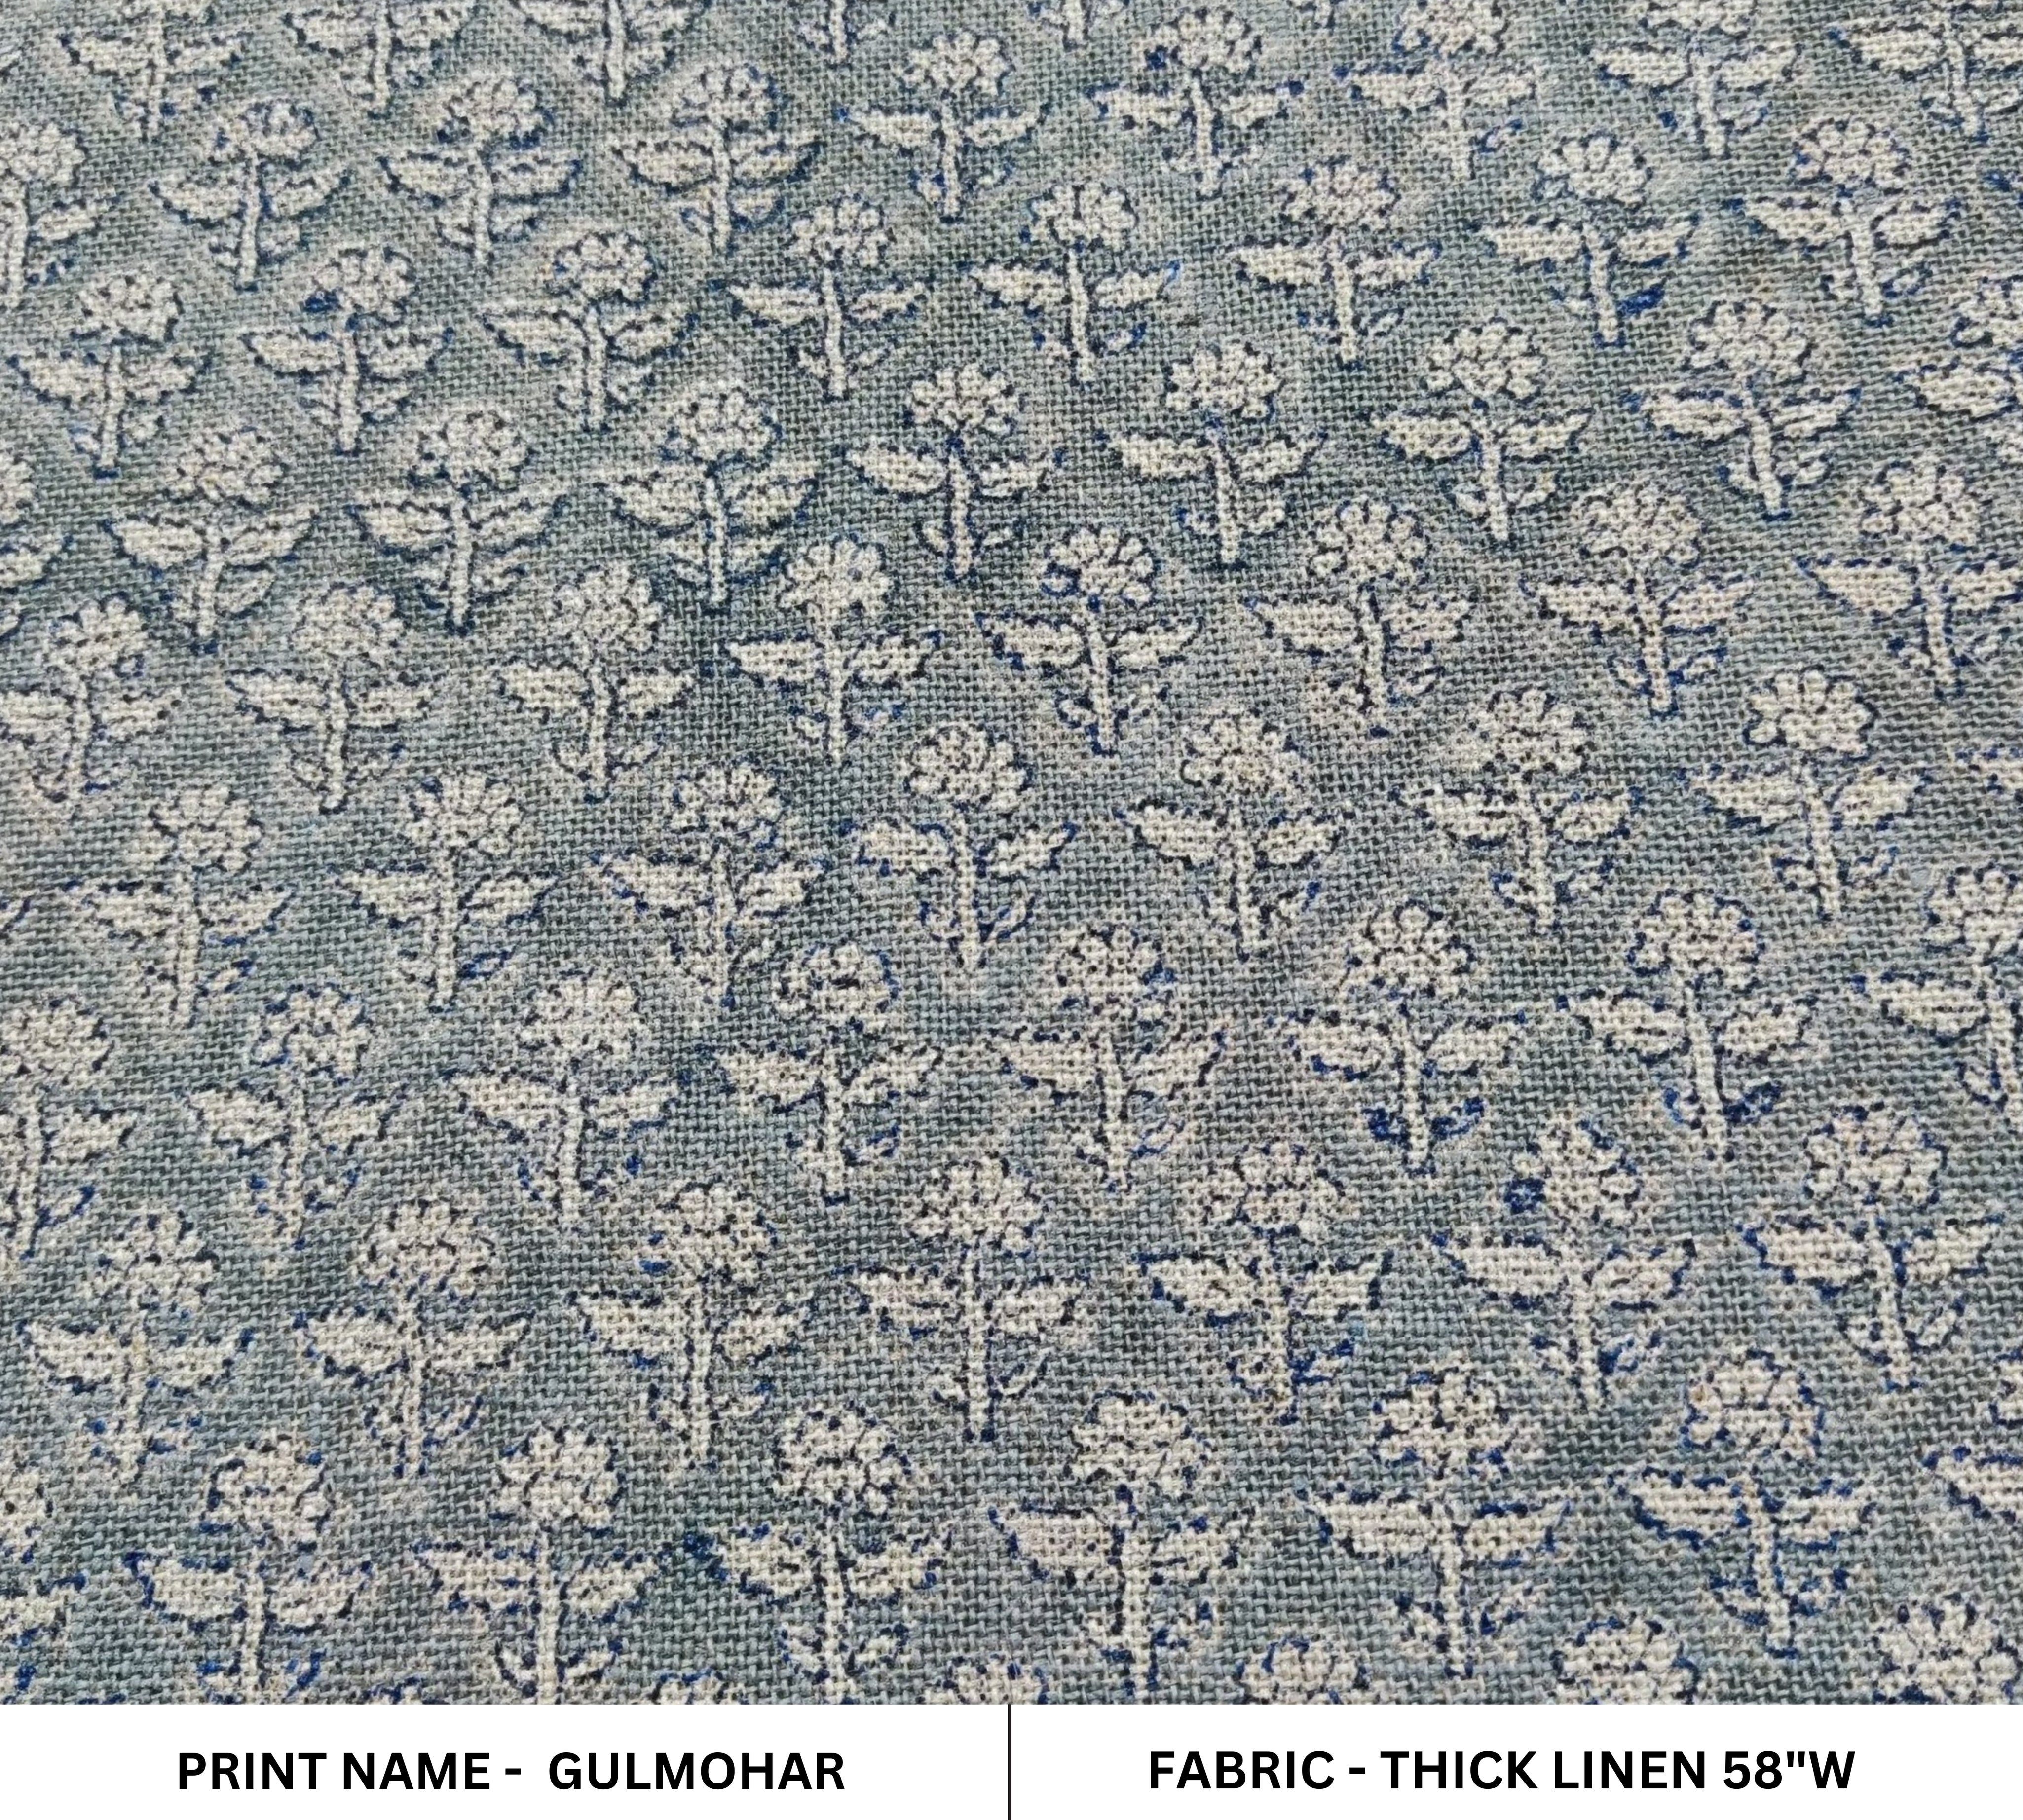 Gulmohar  Heavy Weight Thick Linen  Pure Linen By The Yard  Cushion Fabric  Best Selling  Blue Grey Floral Upholstery  Hand Block